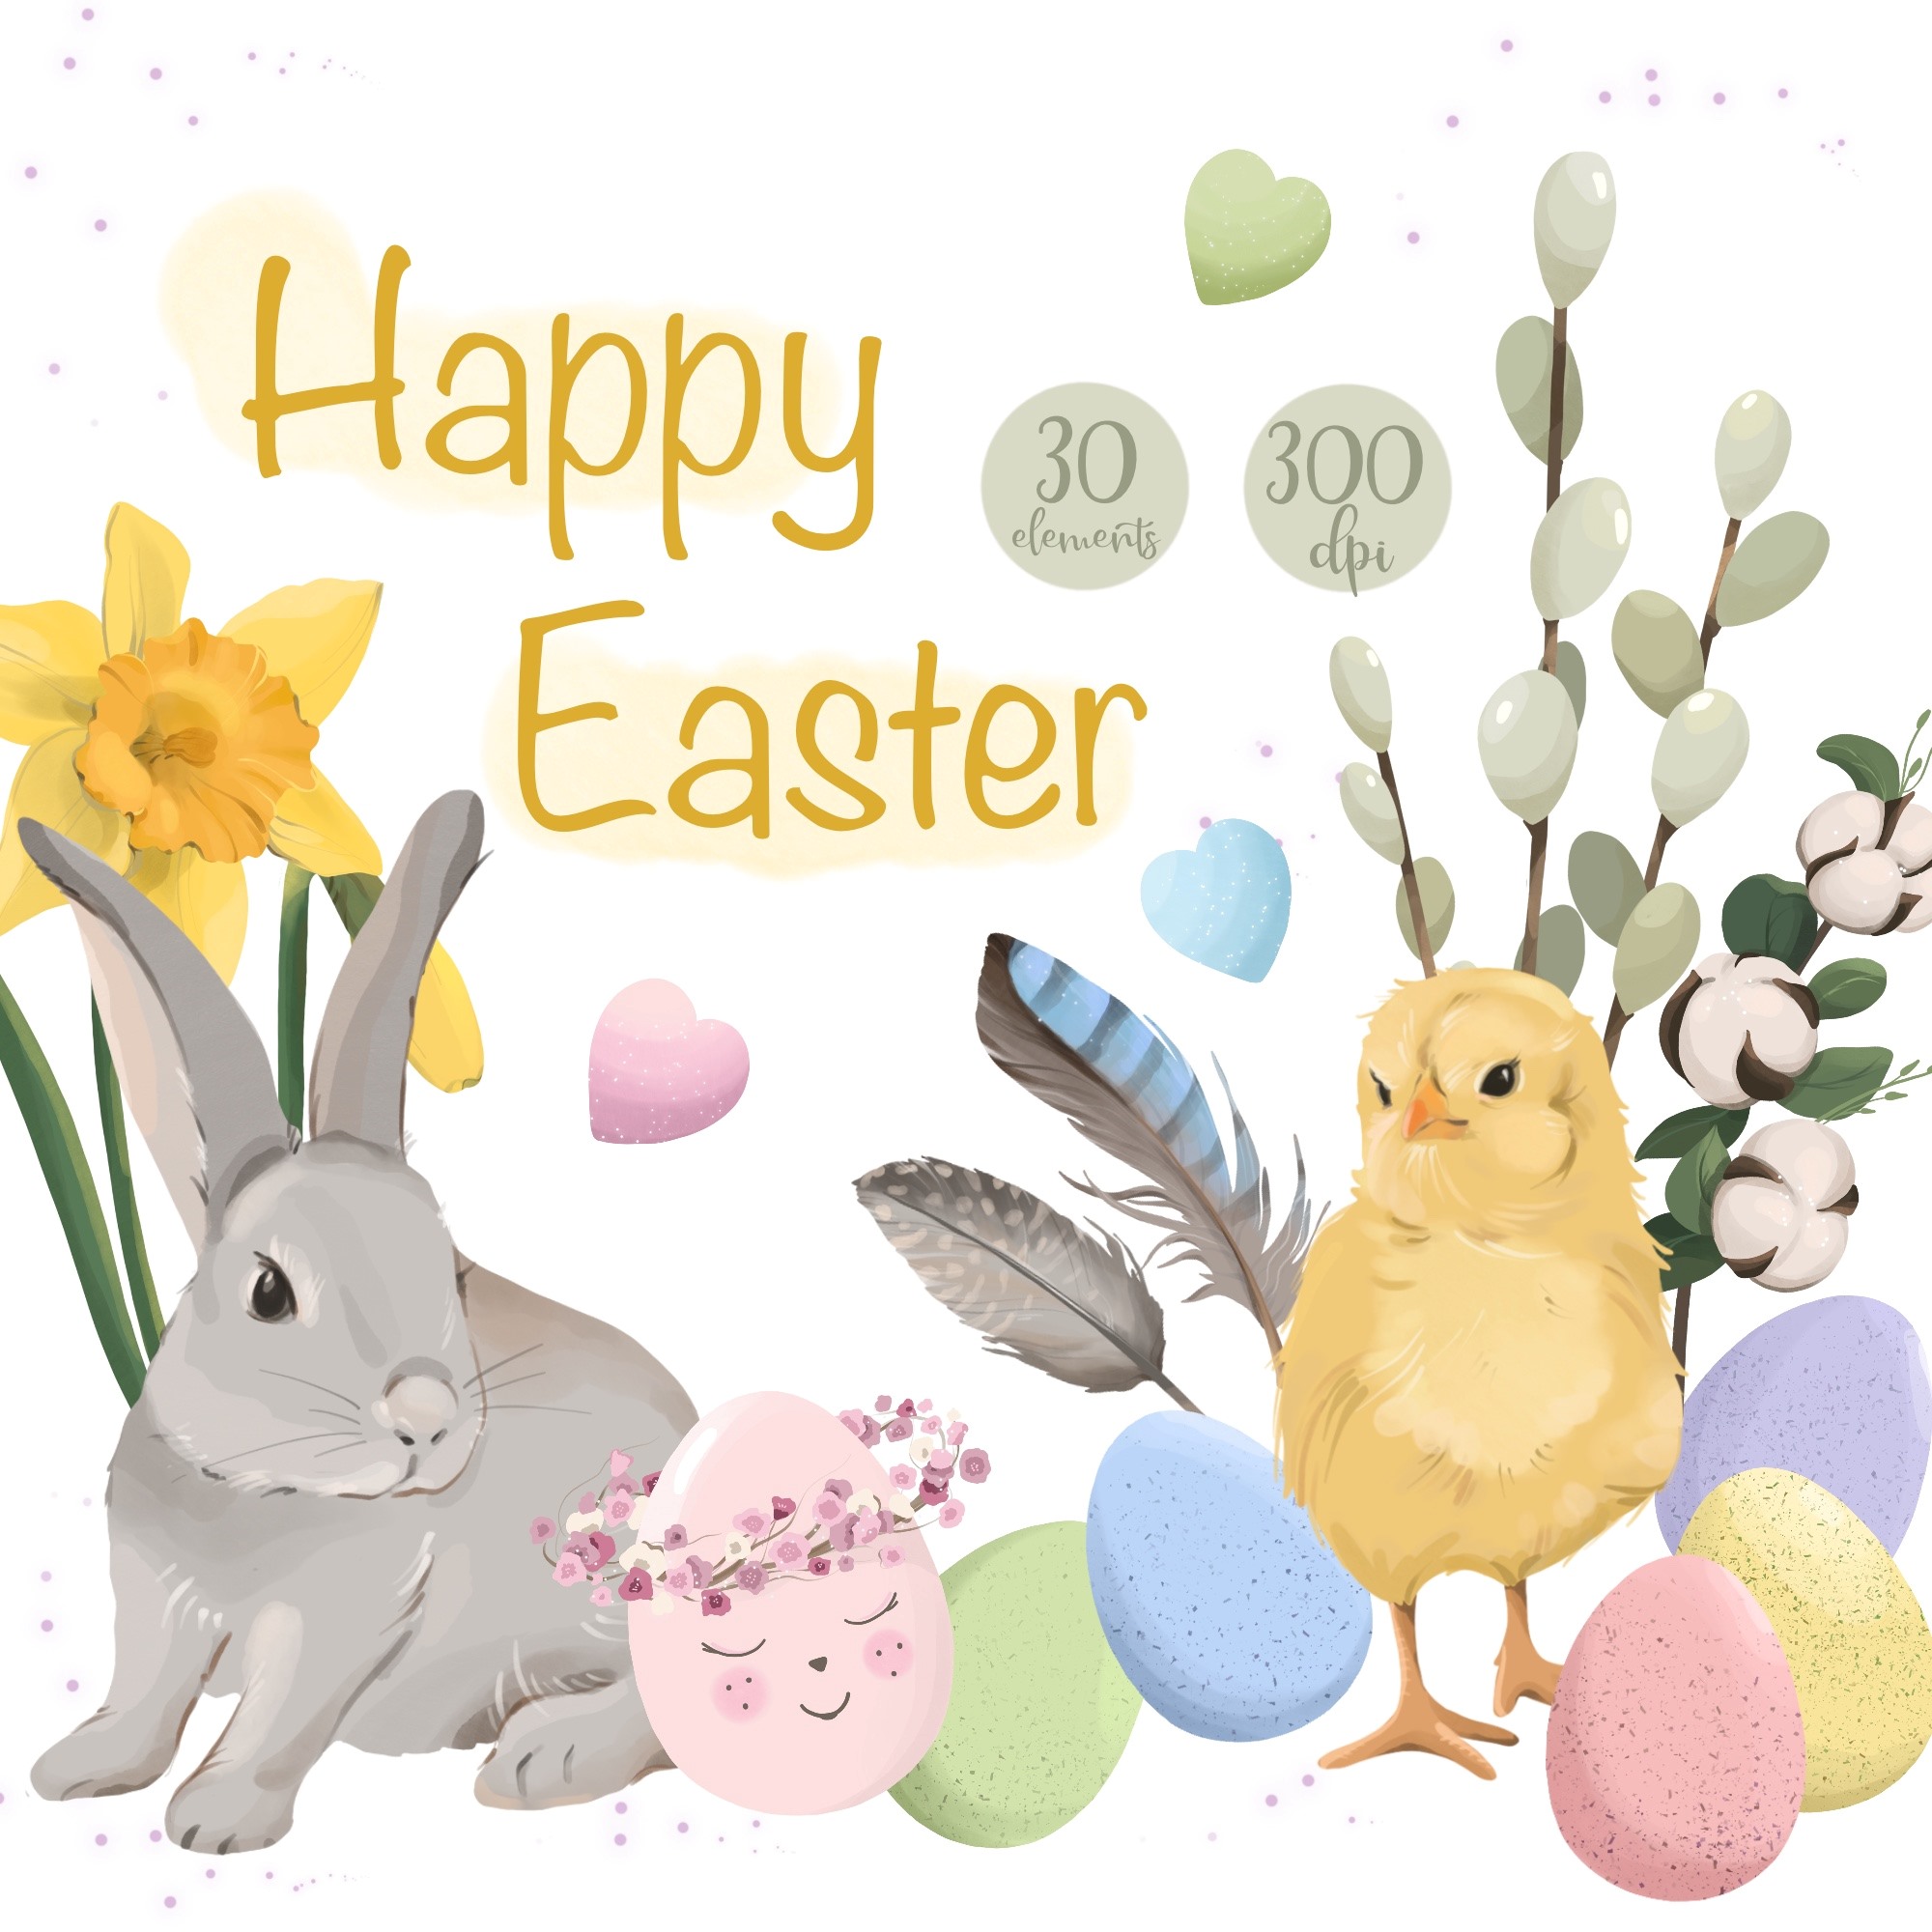 Happy Easter Clipart Set cover image.